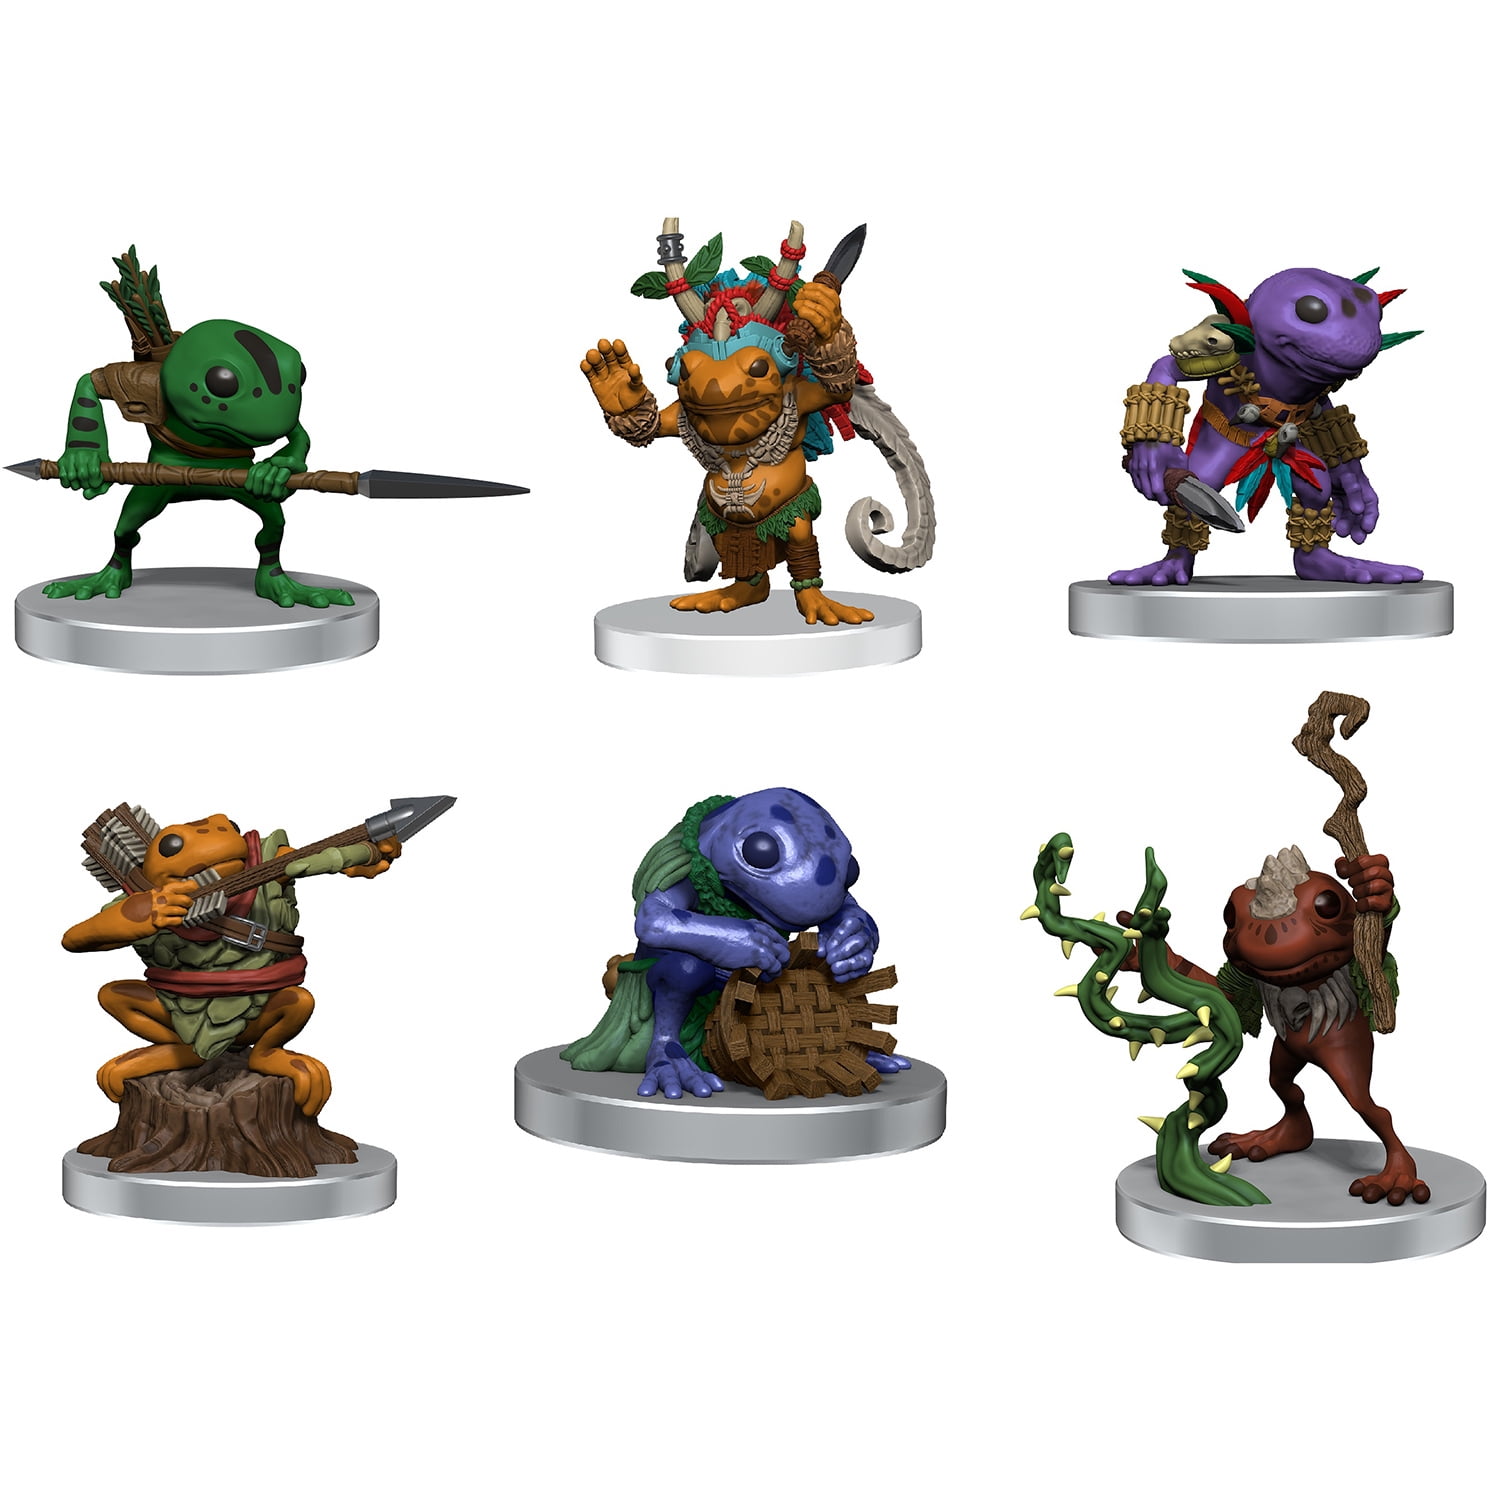 up to 50 styles D&D Dungeons & Dragons Miniatures figure collection toy doll 